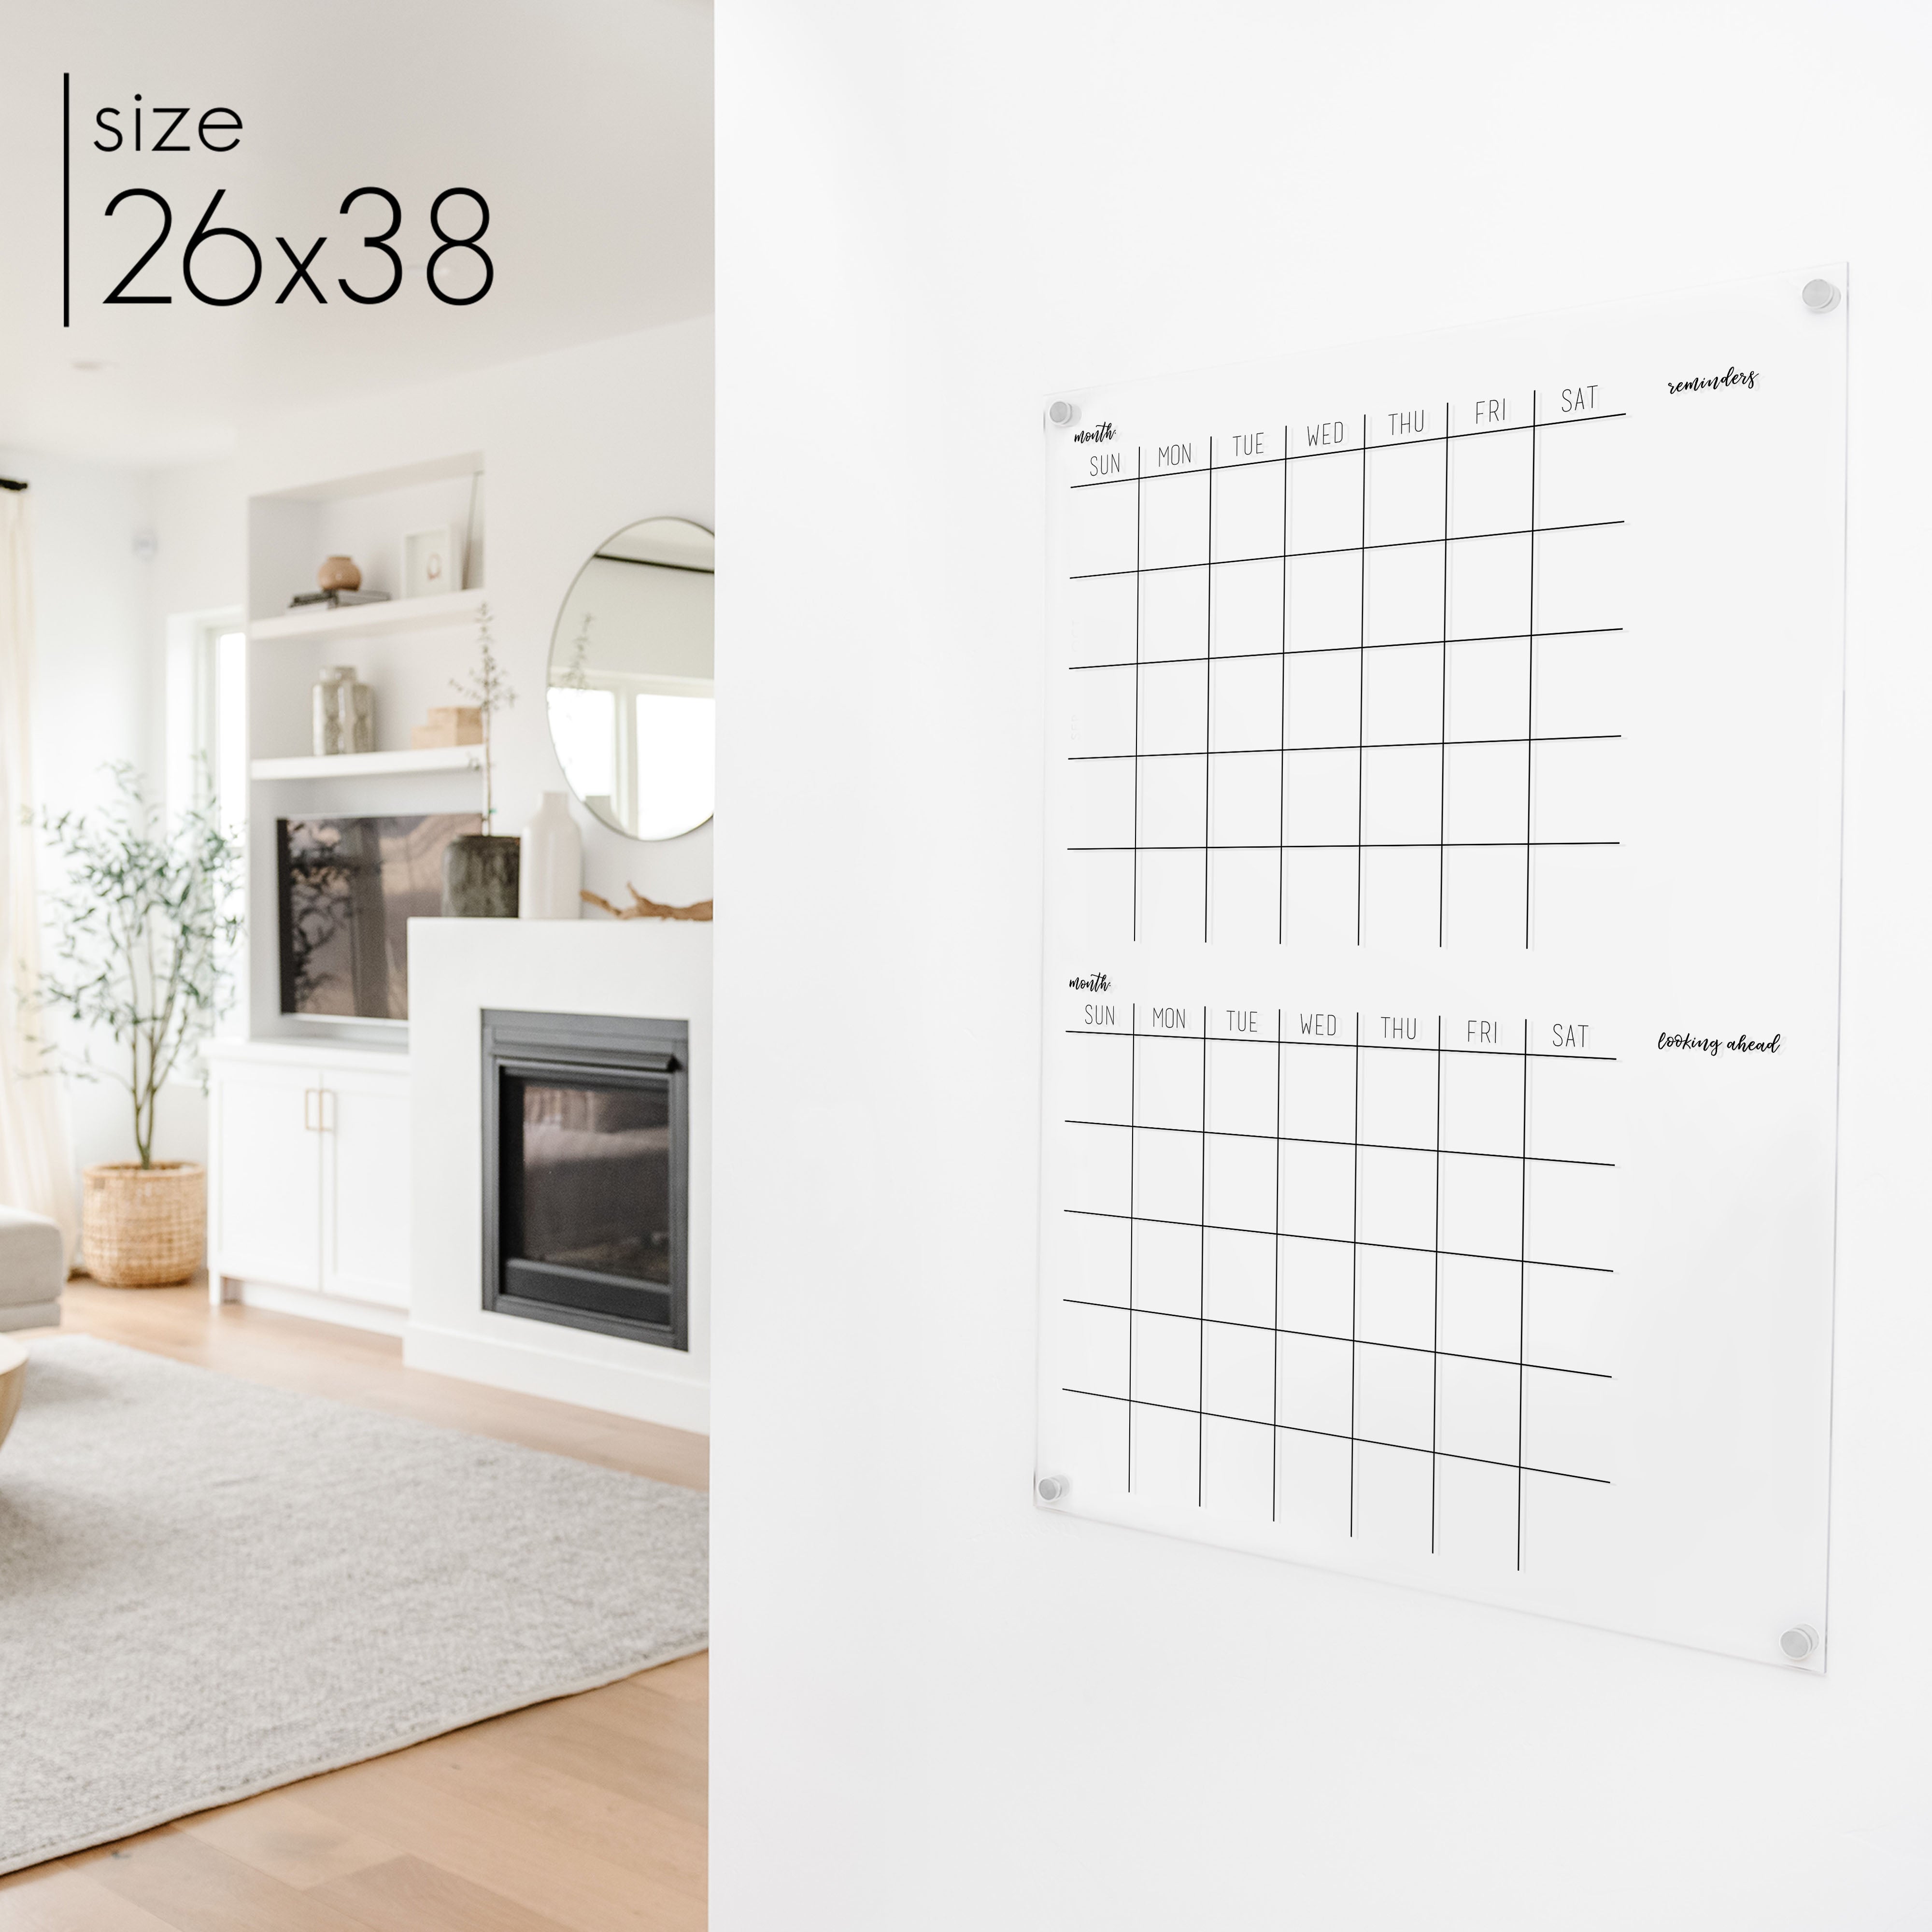 2 Month Acrylic Calendar + 2 Sections | Vertical Traeger